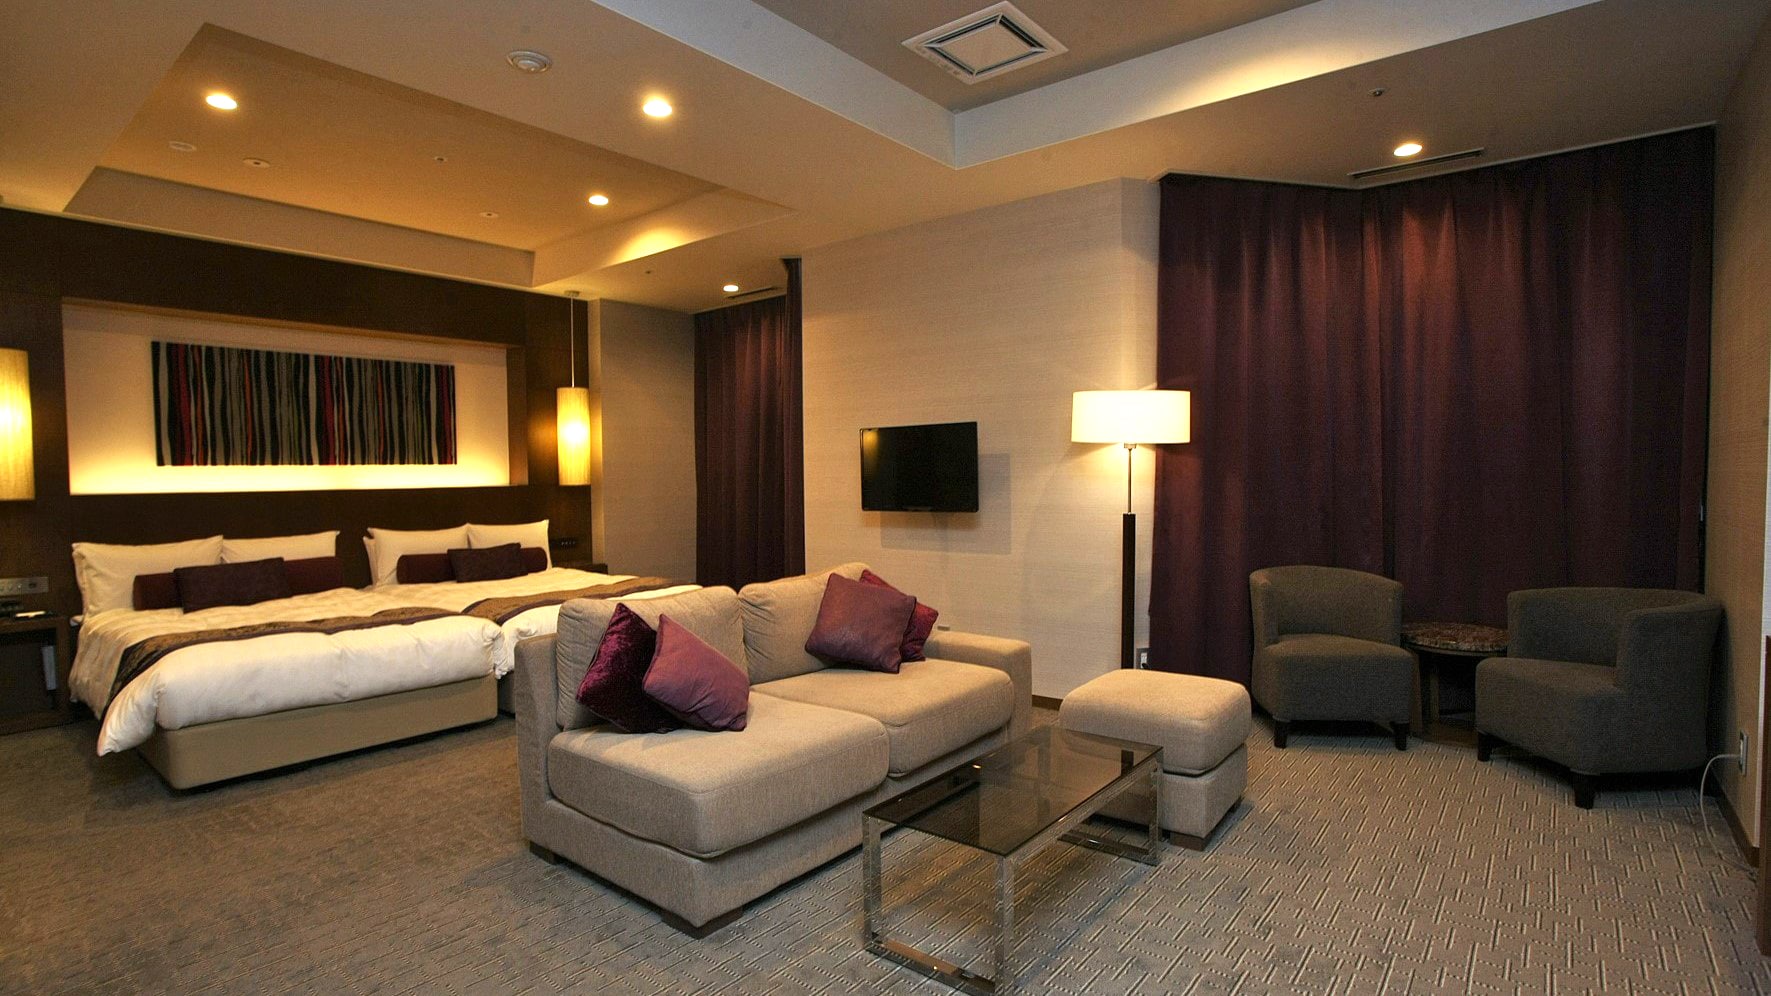 ◆ Suite room with a view bath / A luxurious suite room that can be set up comfortably. (Example of guest room)